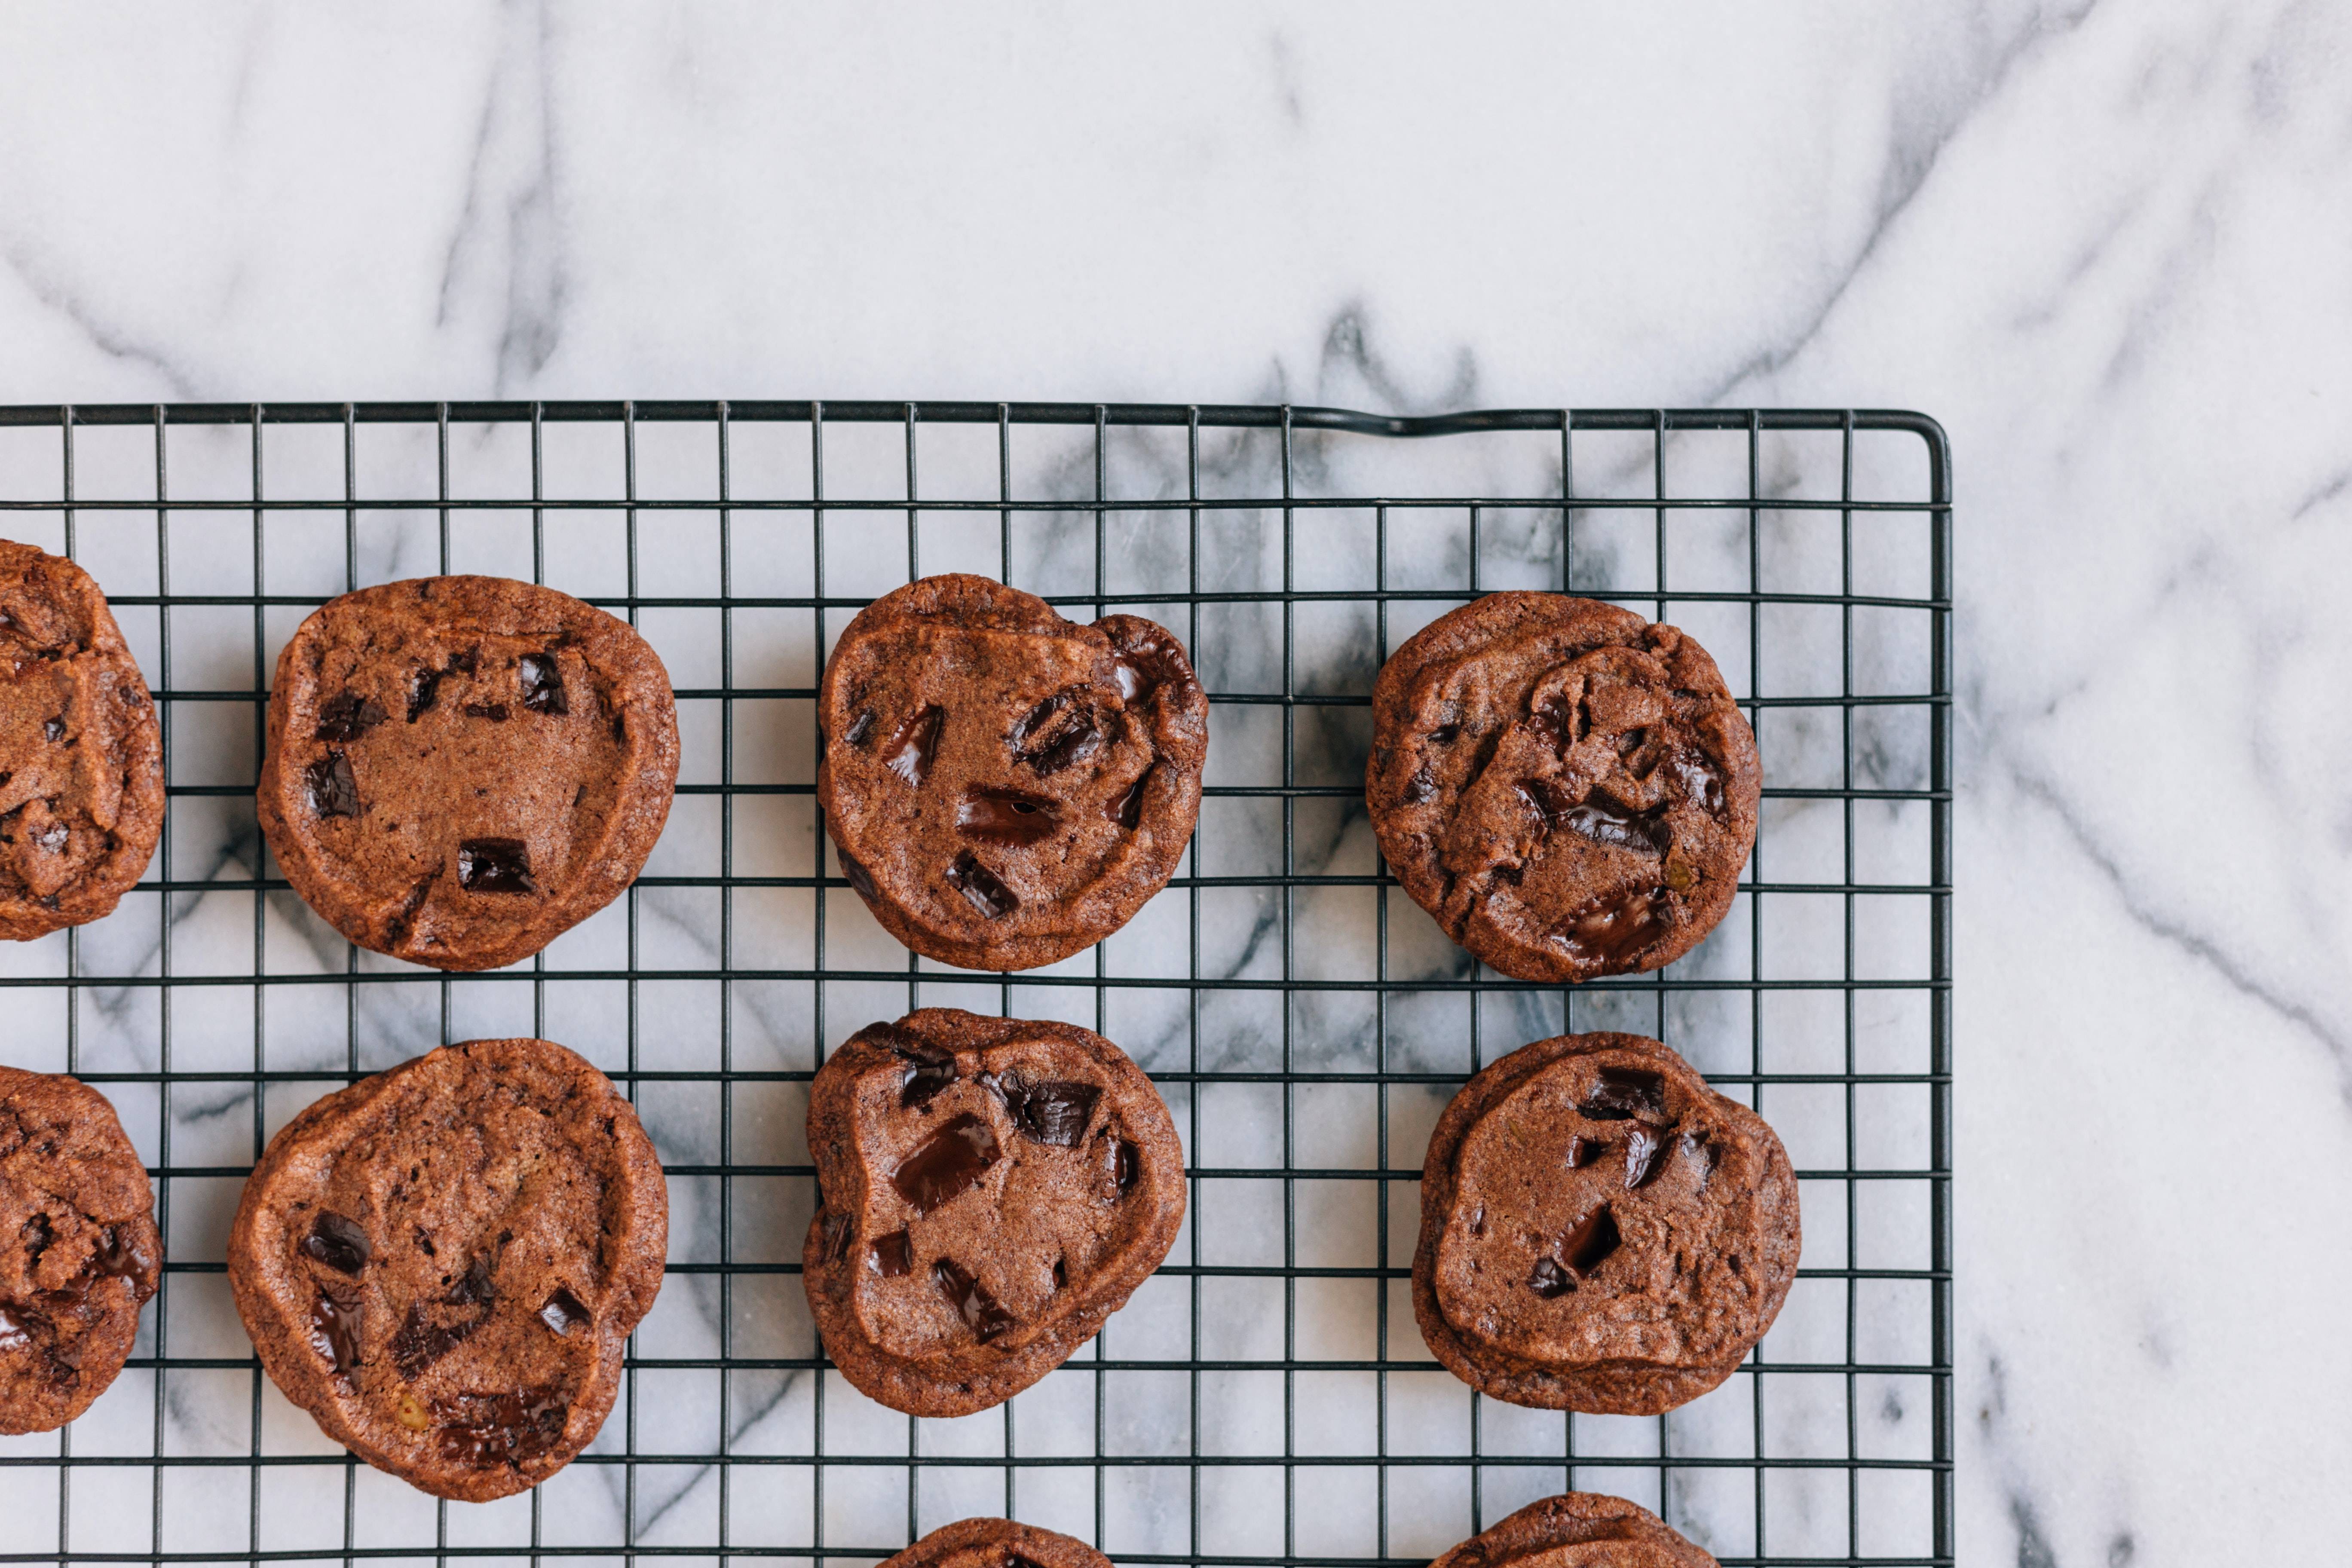 Cookies are dead, and so are your targeting strategies. Now what?